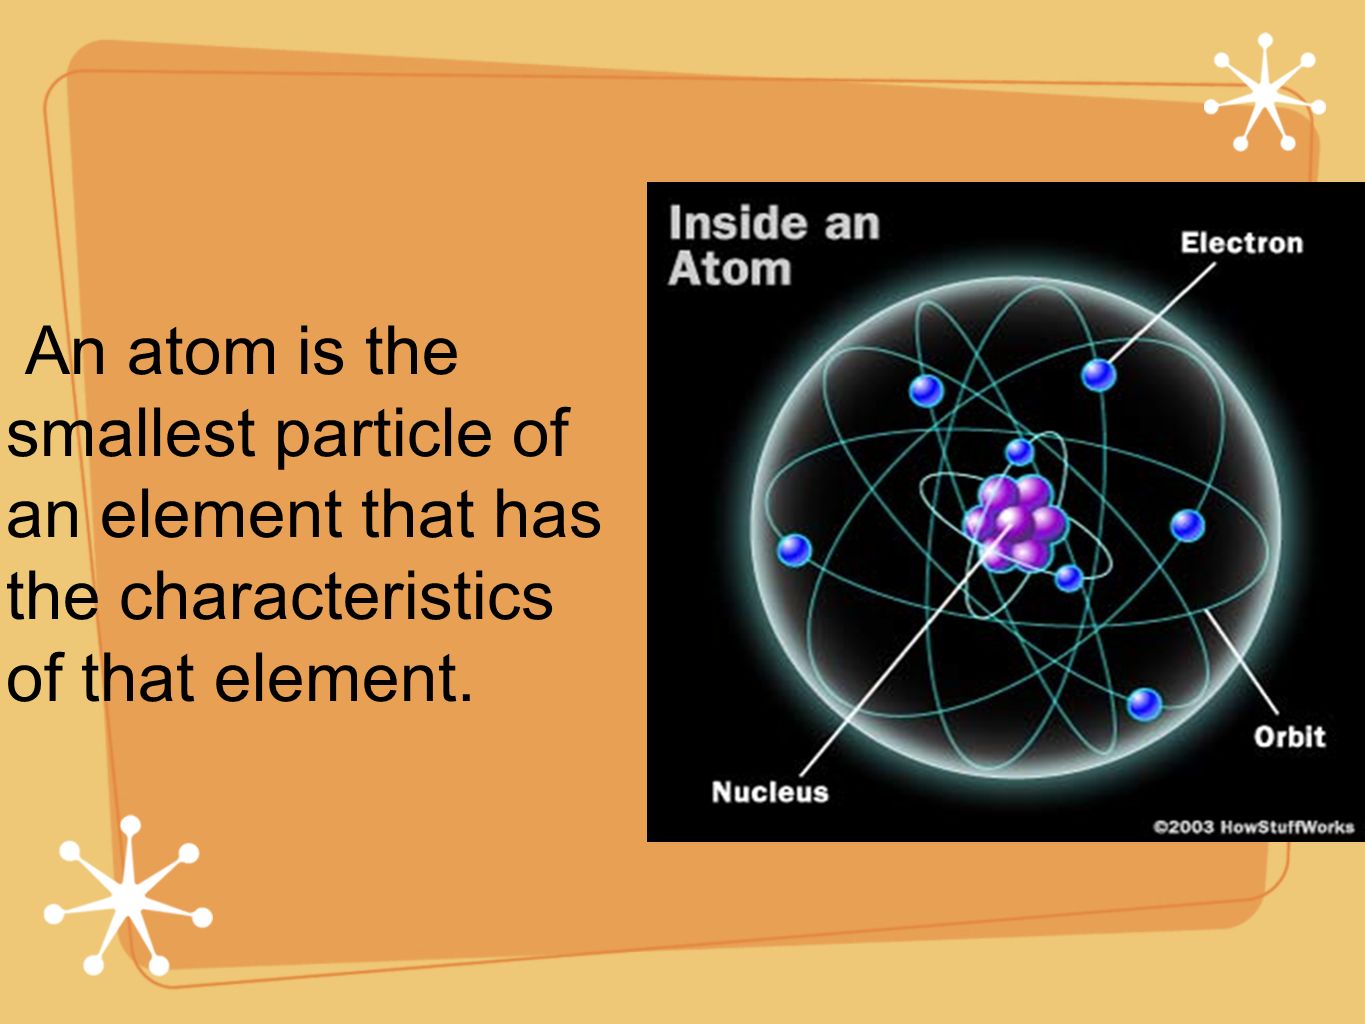 An atom is the smallest particle of an element that has the characteristics of that element.